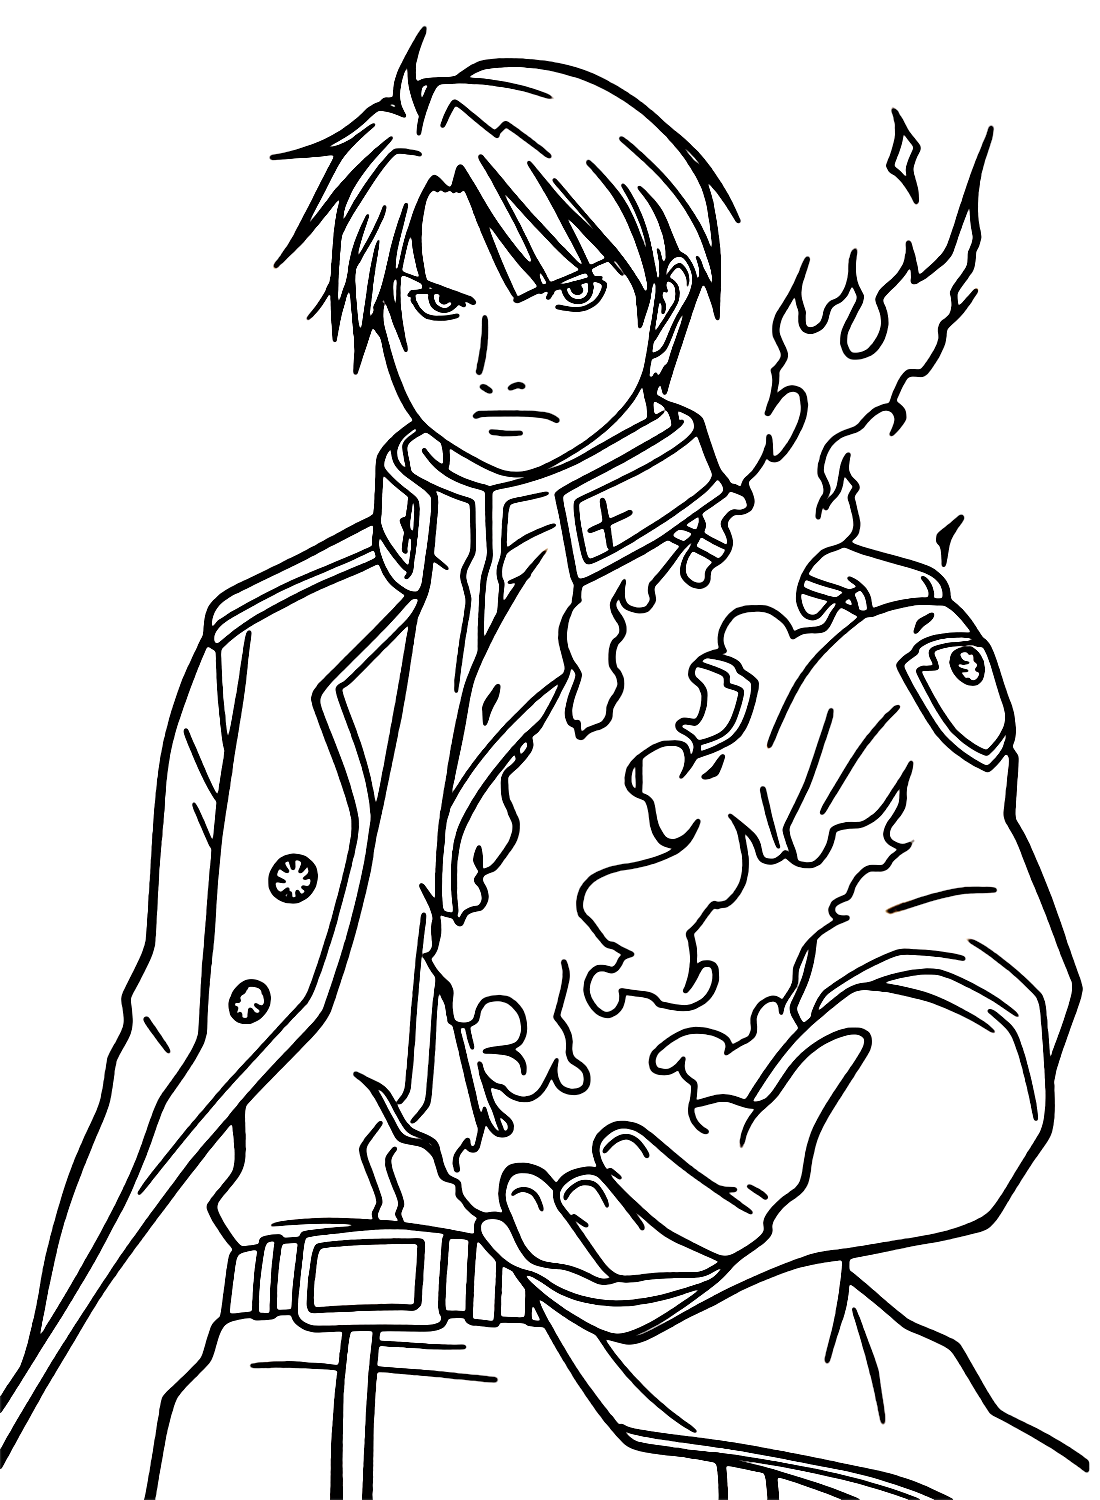 Roy Mustang Coloring Page PDF from Roy Mustang